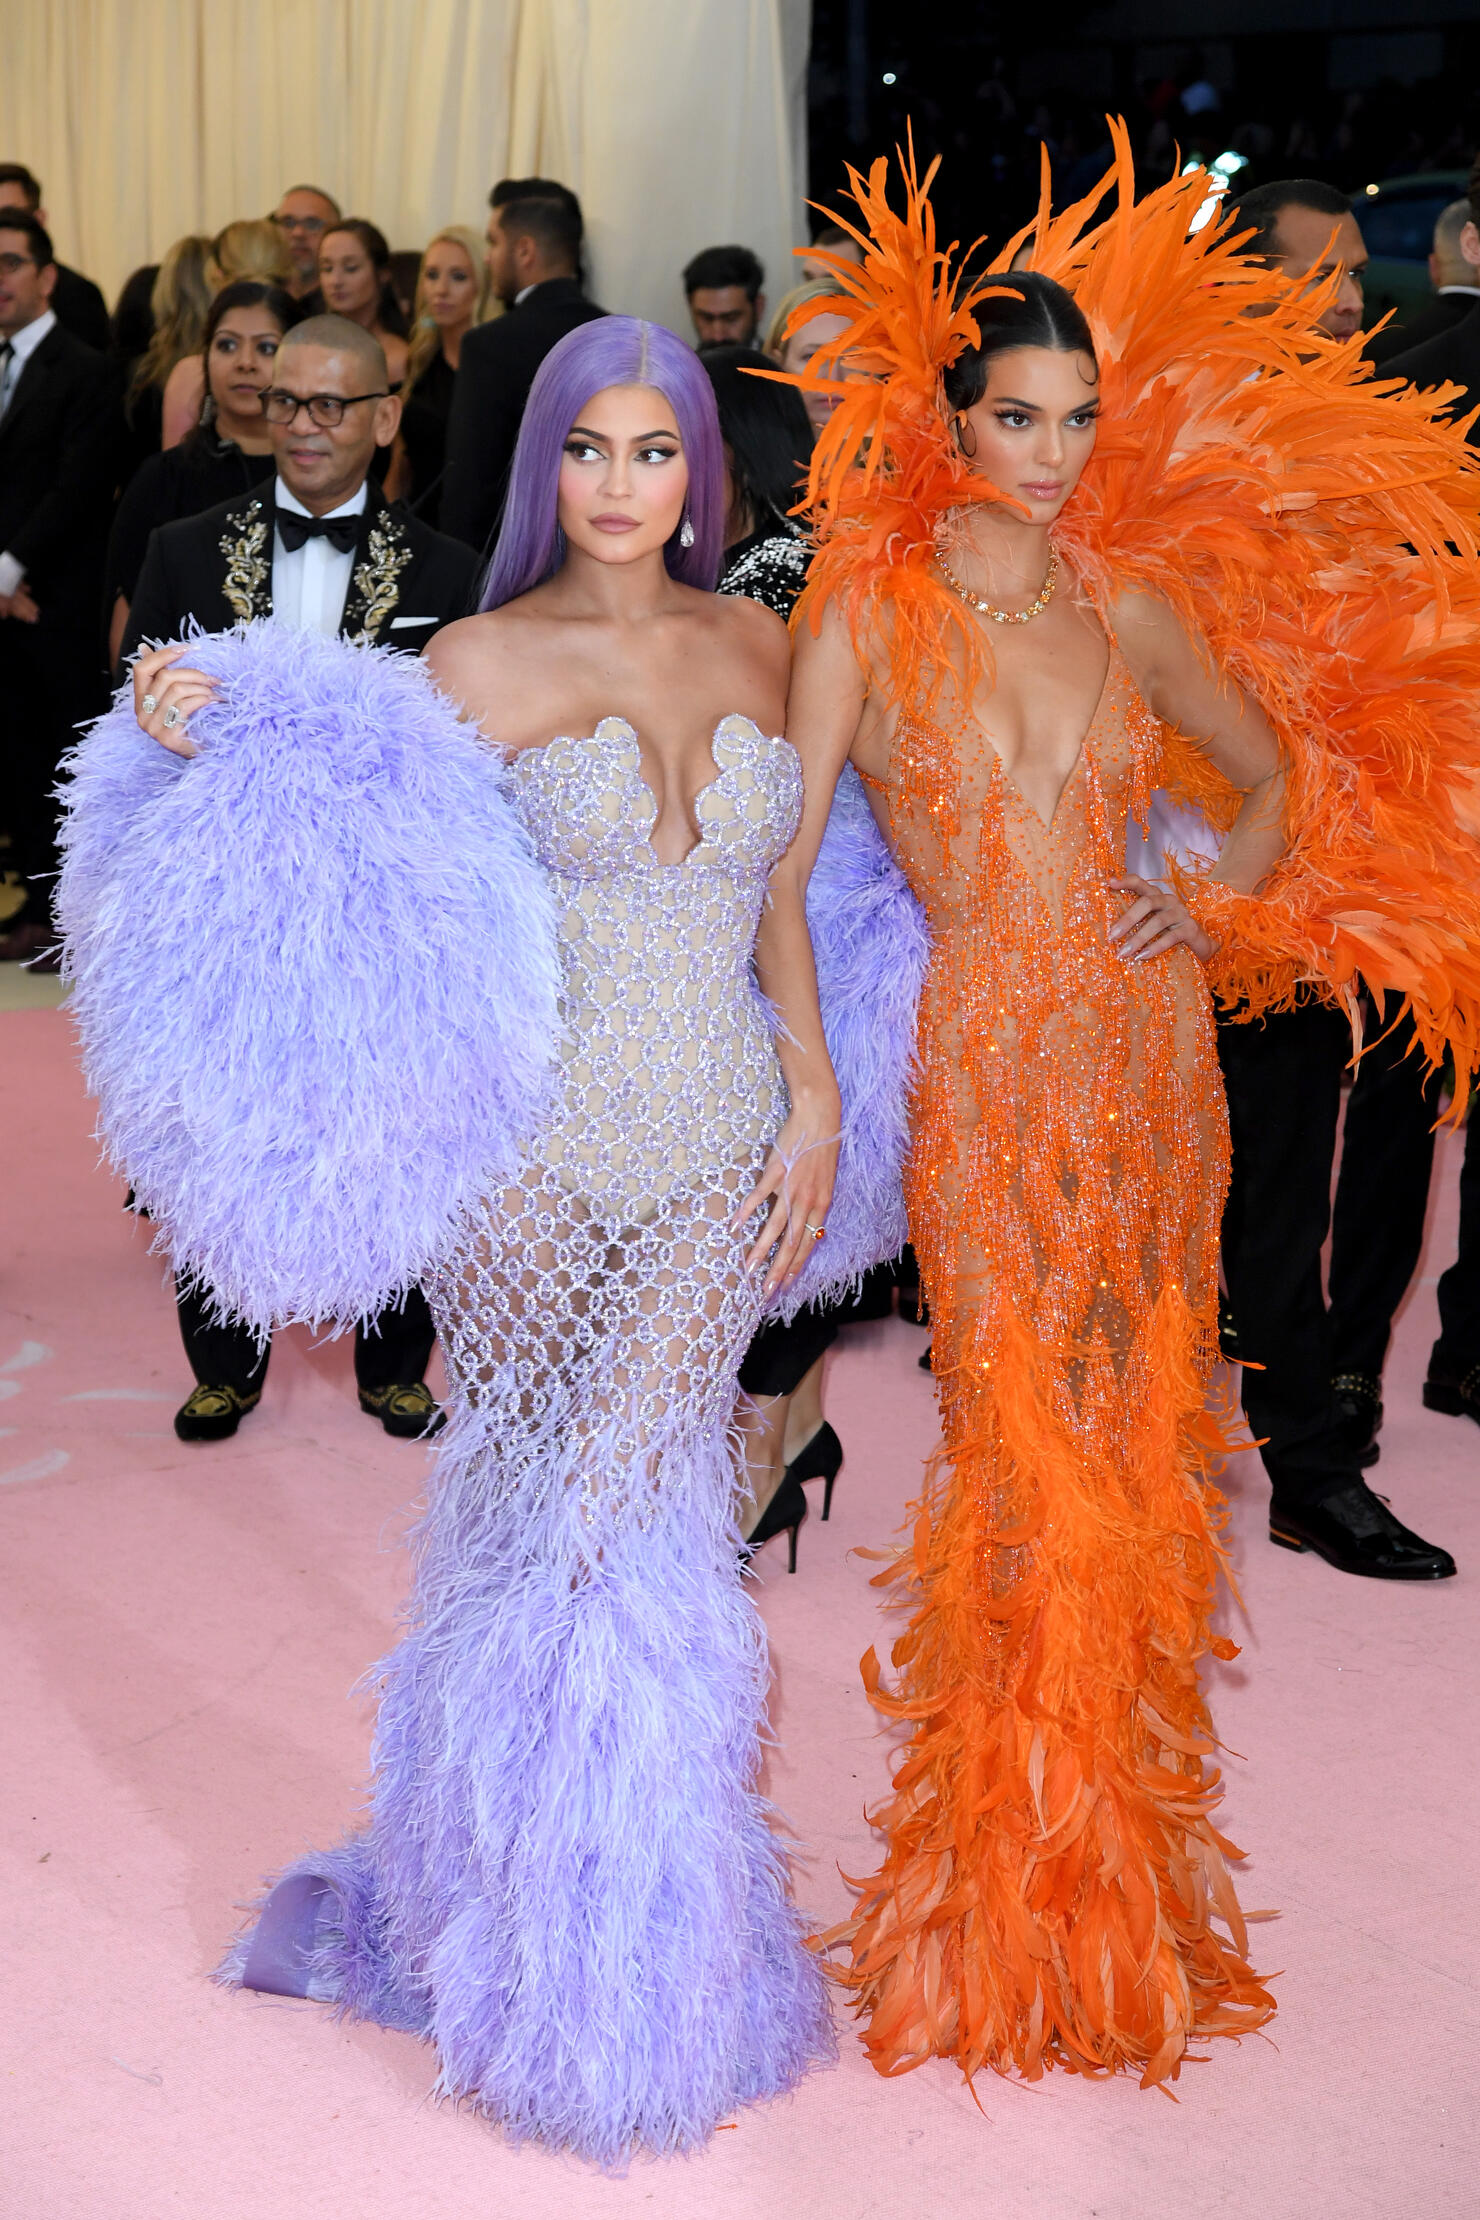 The KarJenners Owned The 2019 Met Gala — See Their Red Carpet